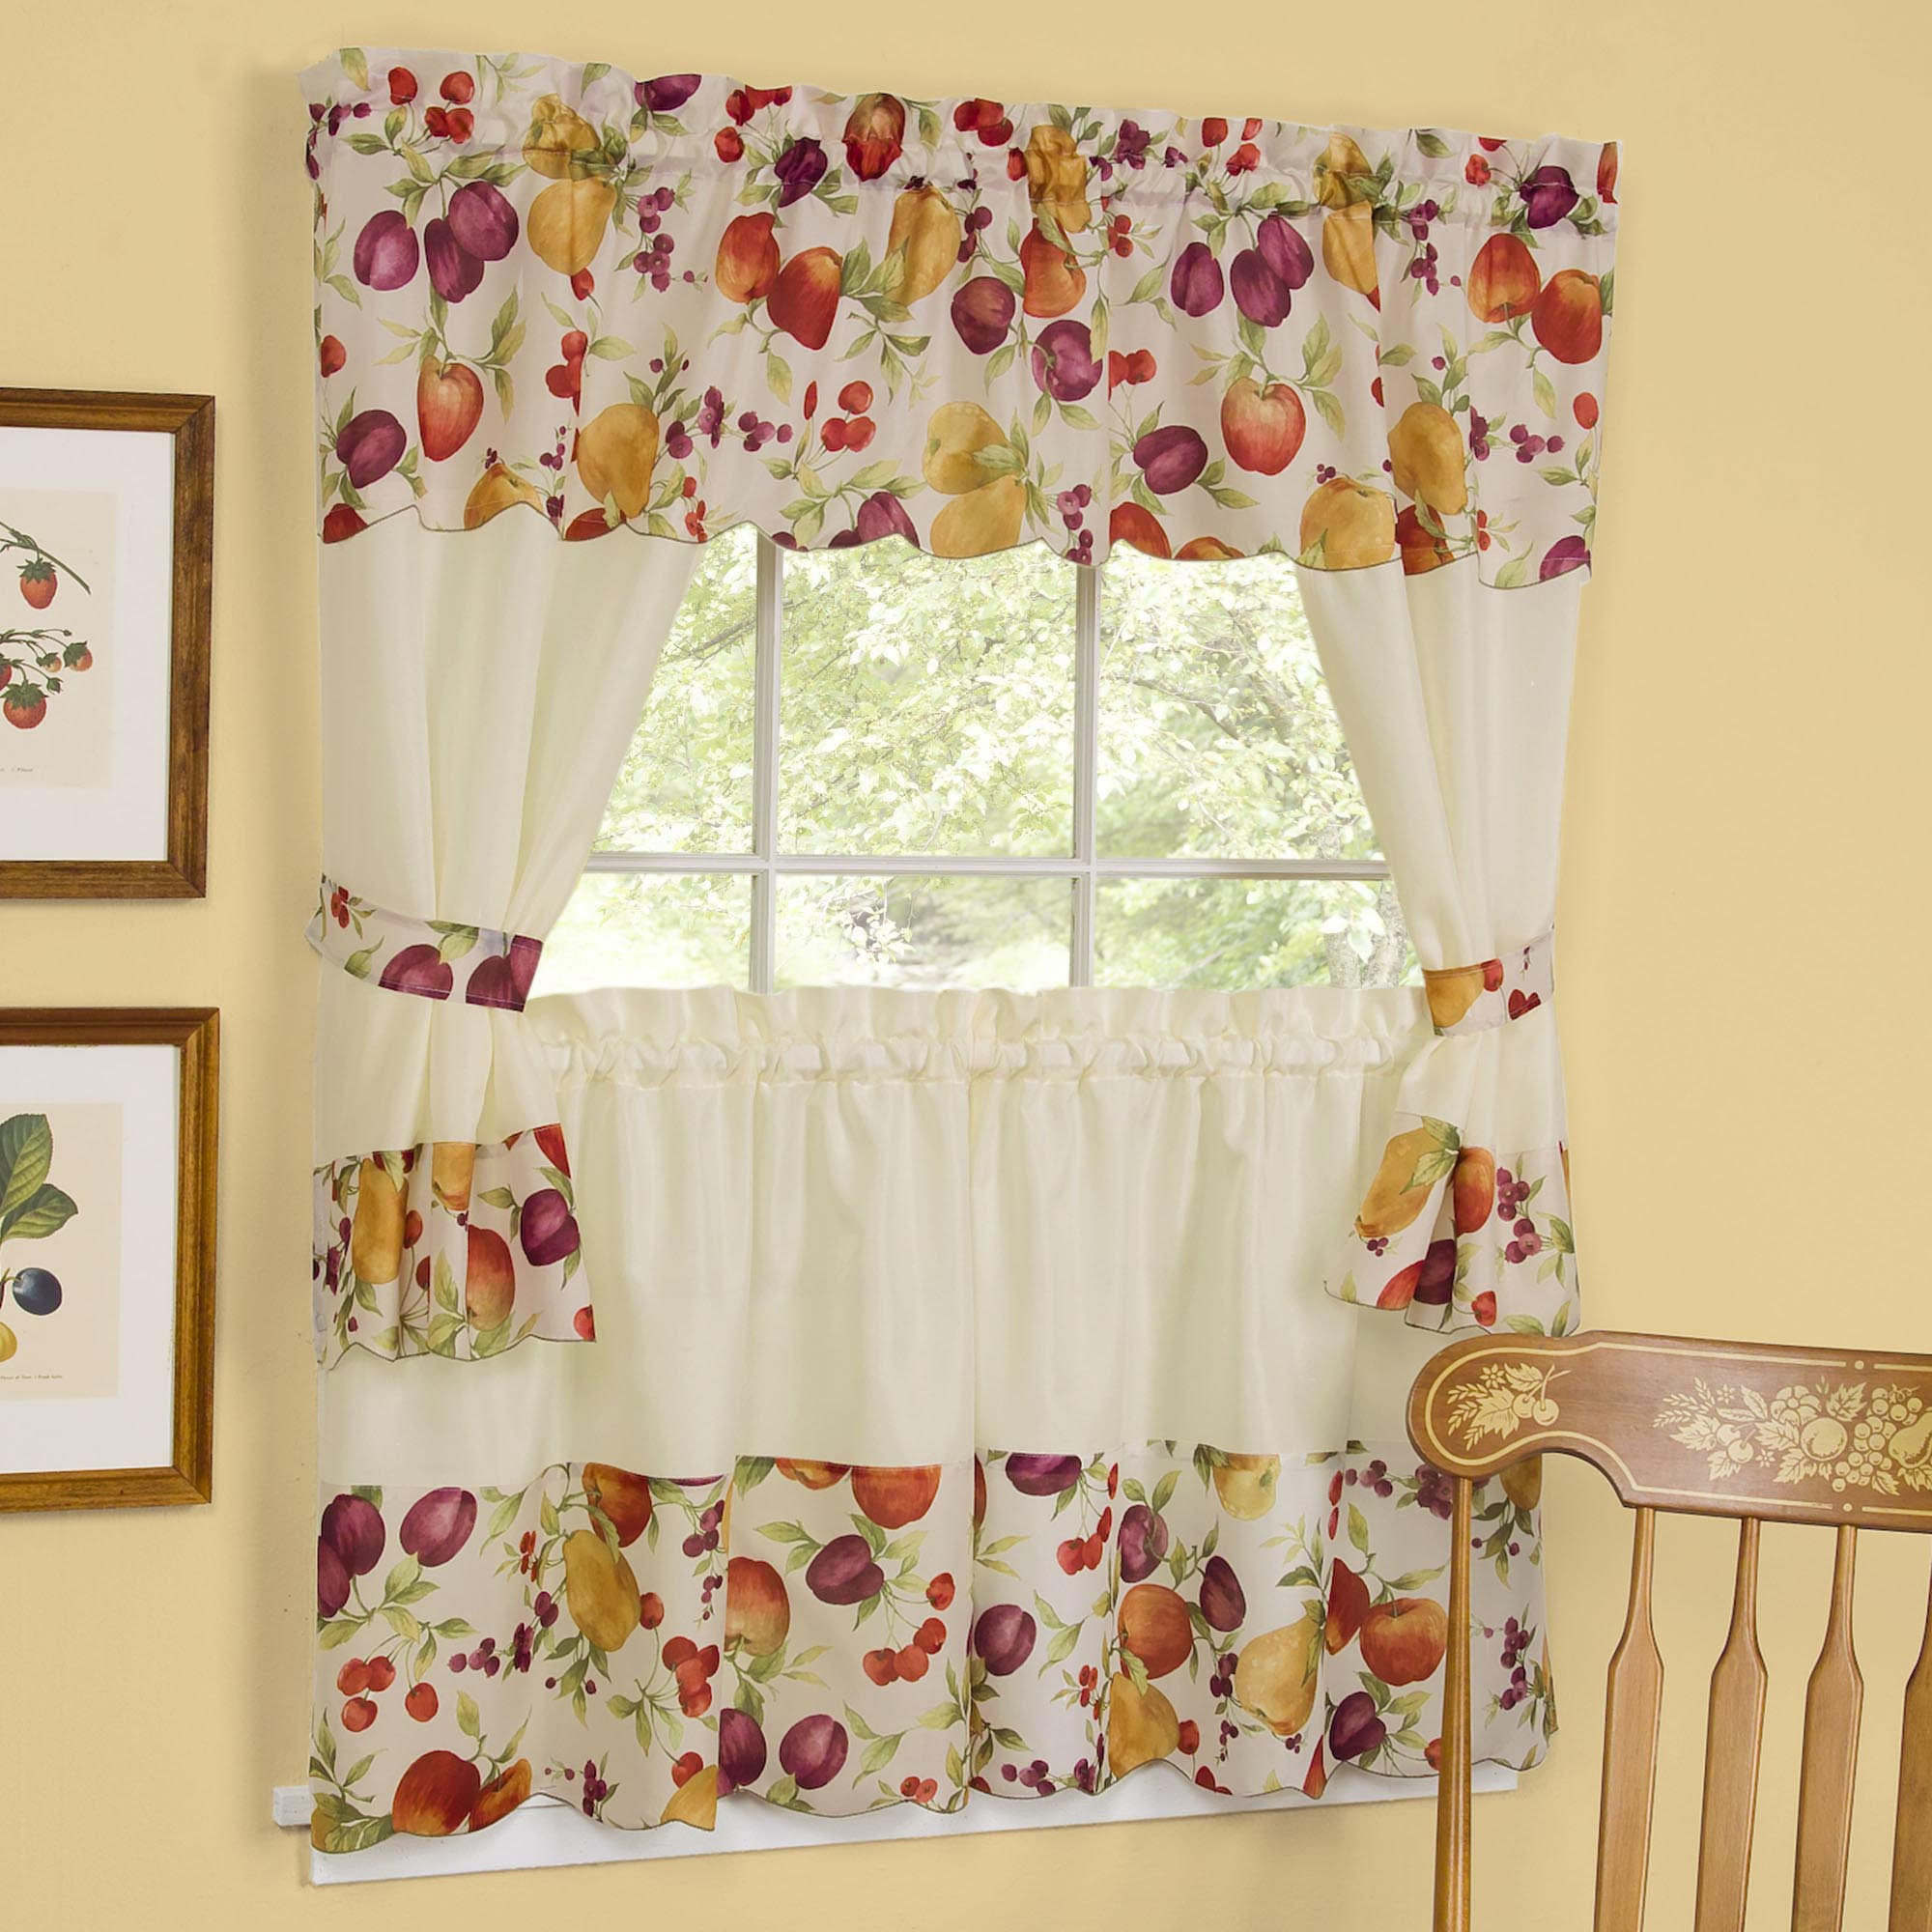 Valance Curtains For Kitchen
 Kitchen Curtains Swags And Valances